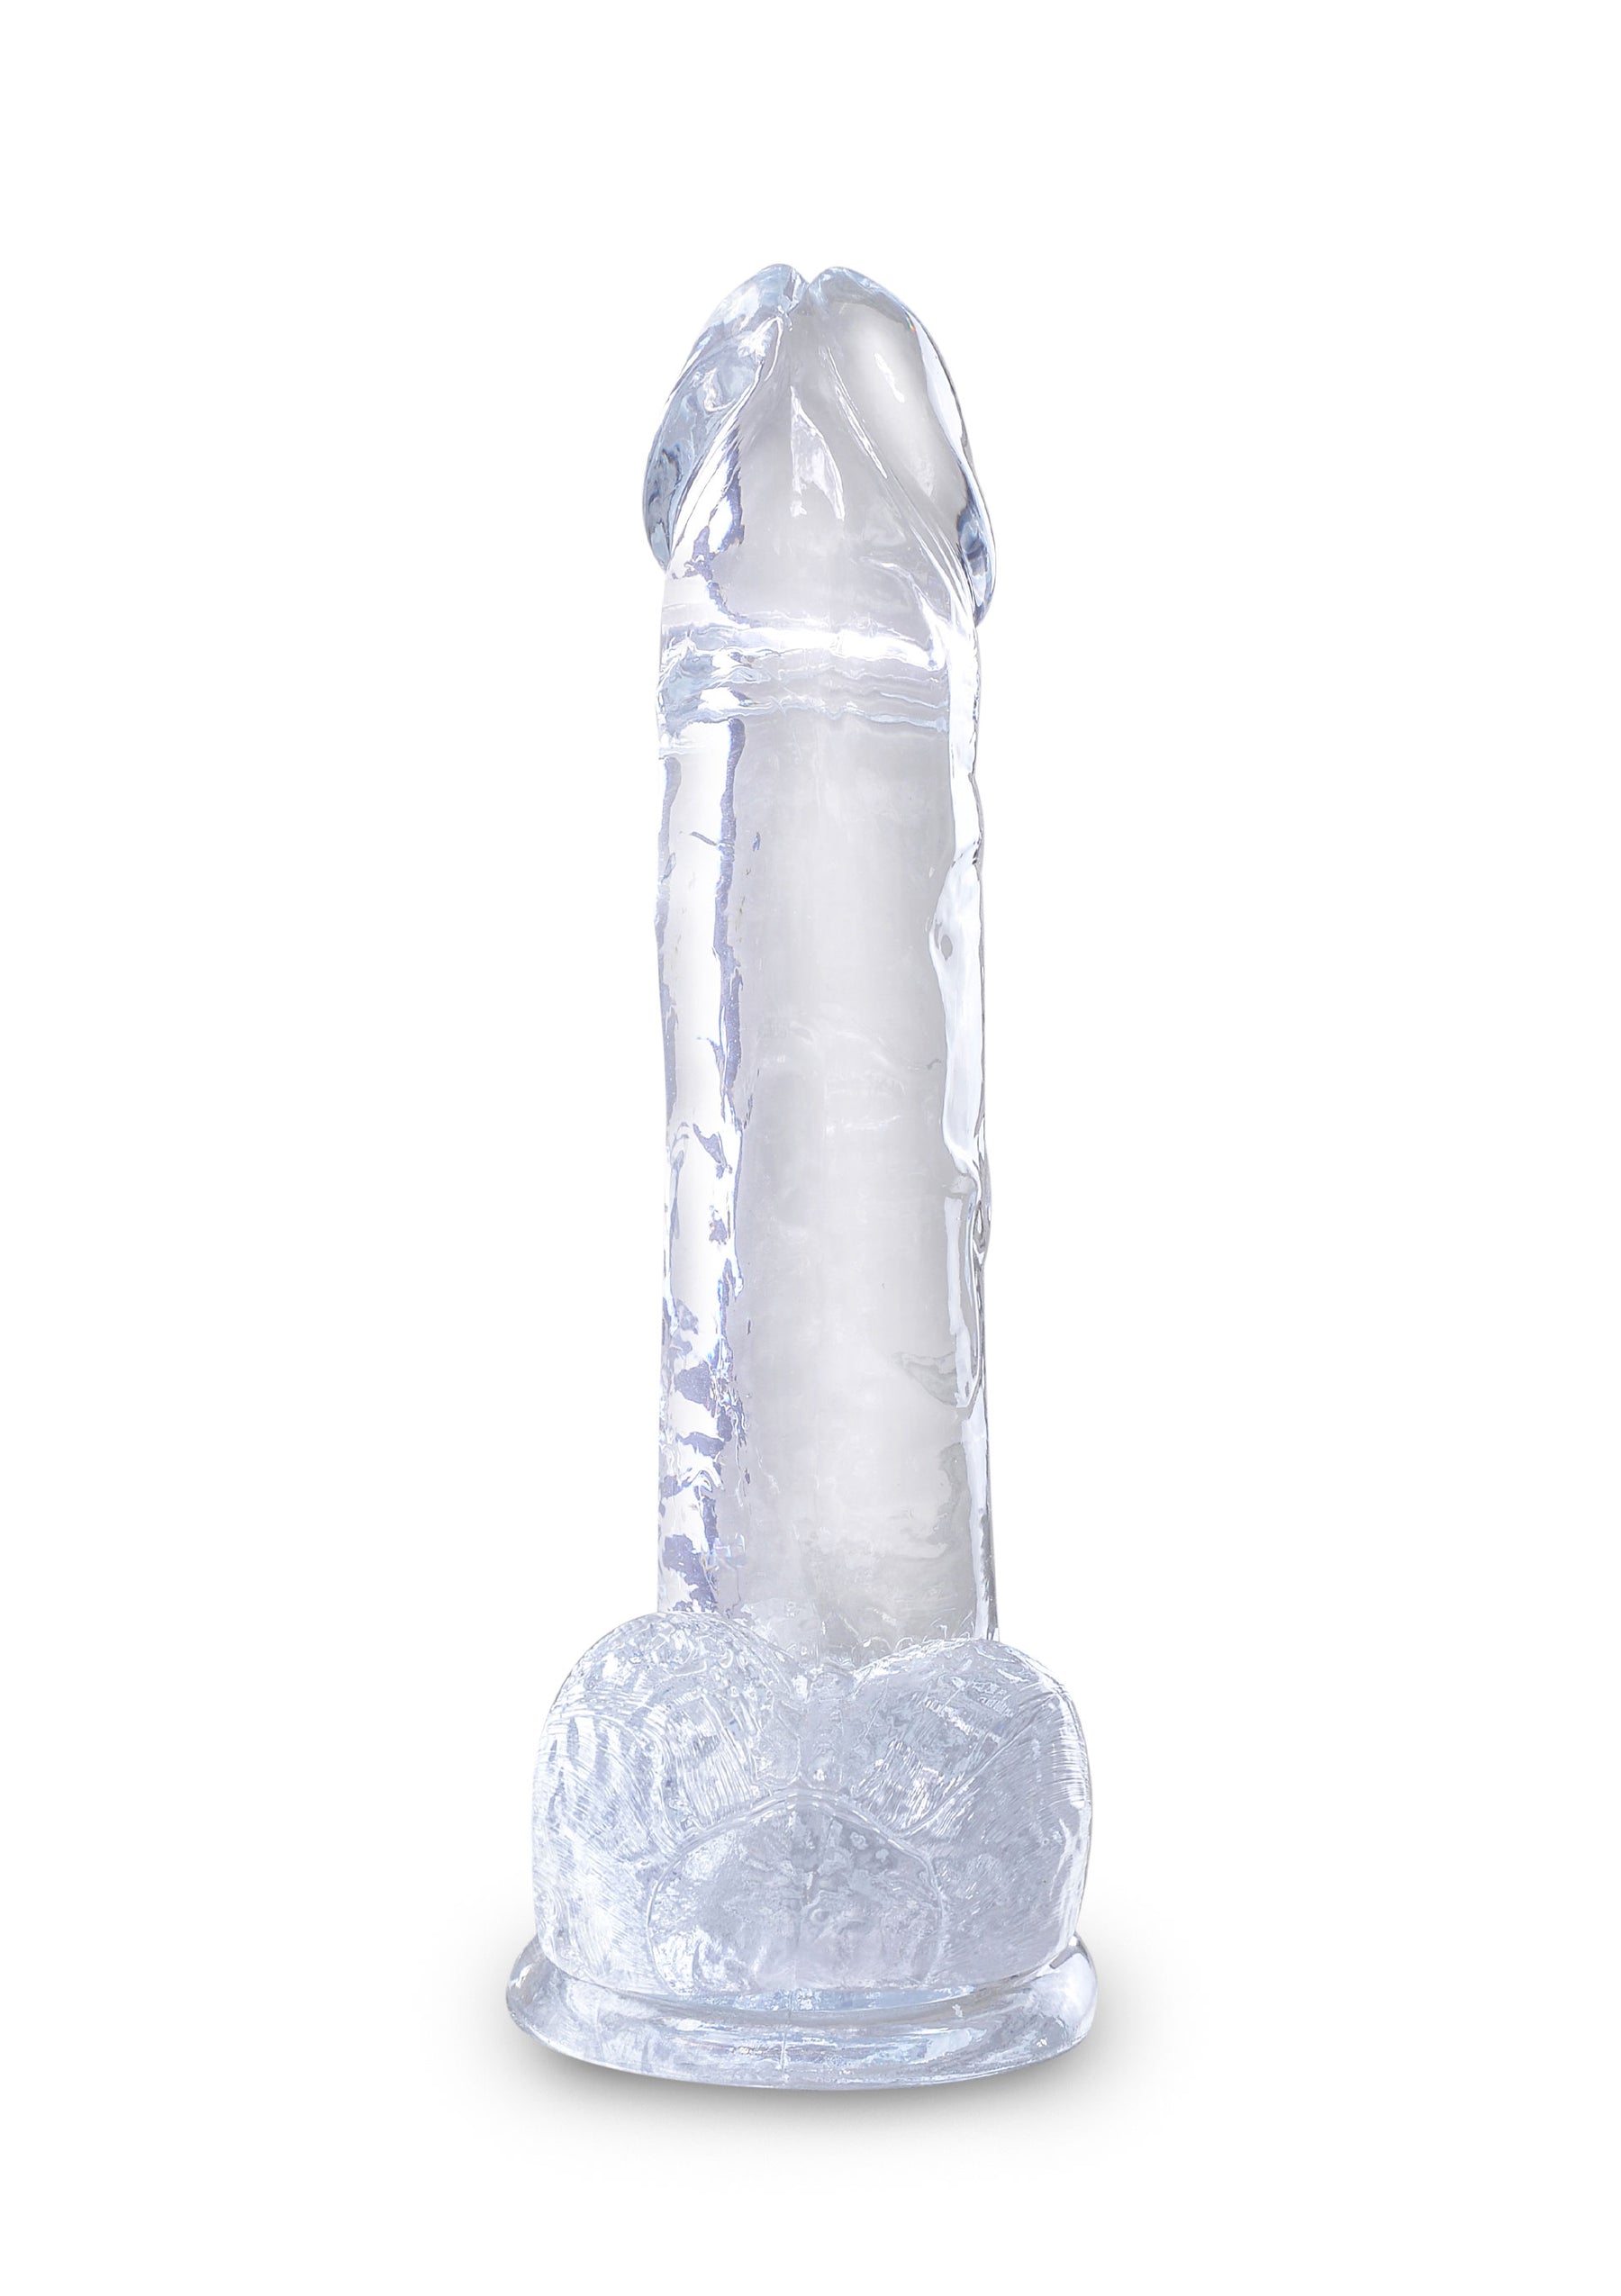 King Cock 7 Inch Cock with Balls-erotic-world-munchen.myshopify.com